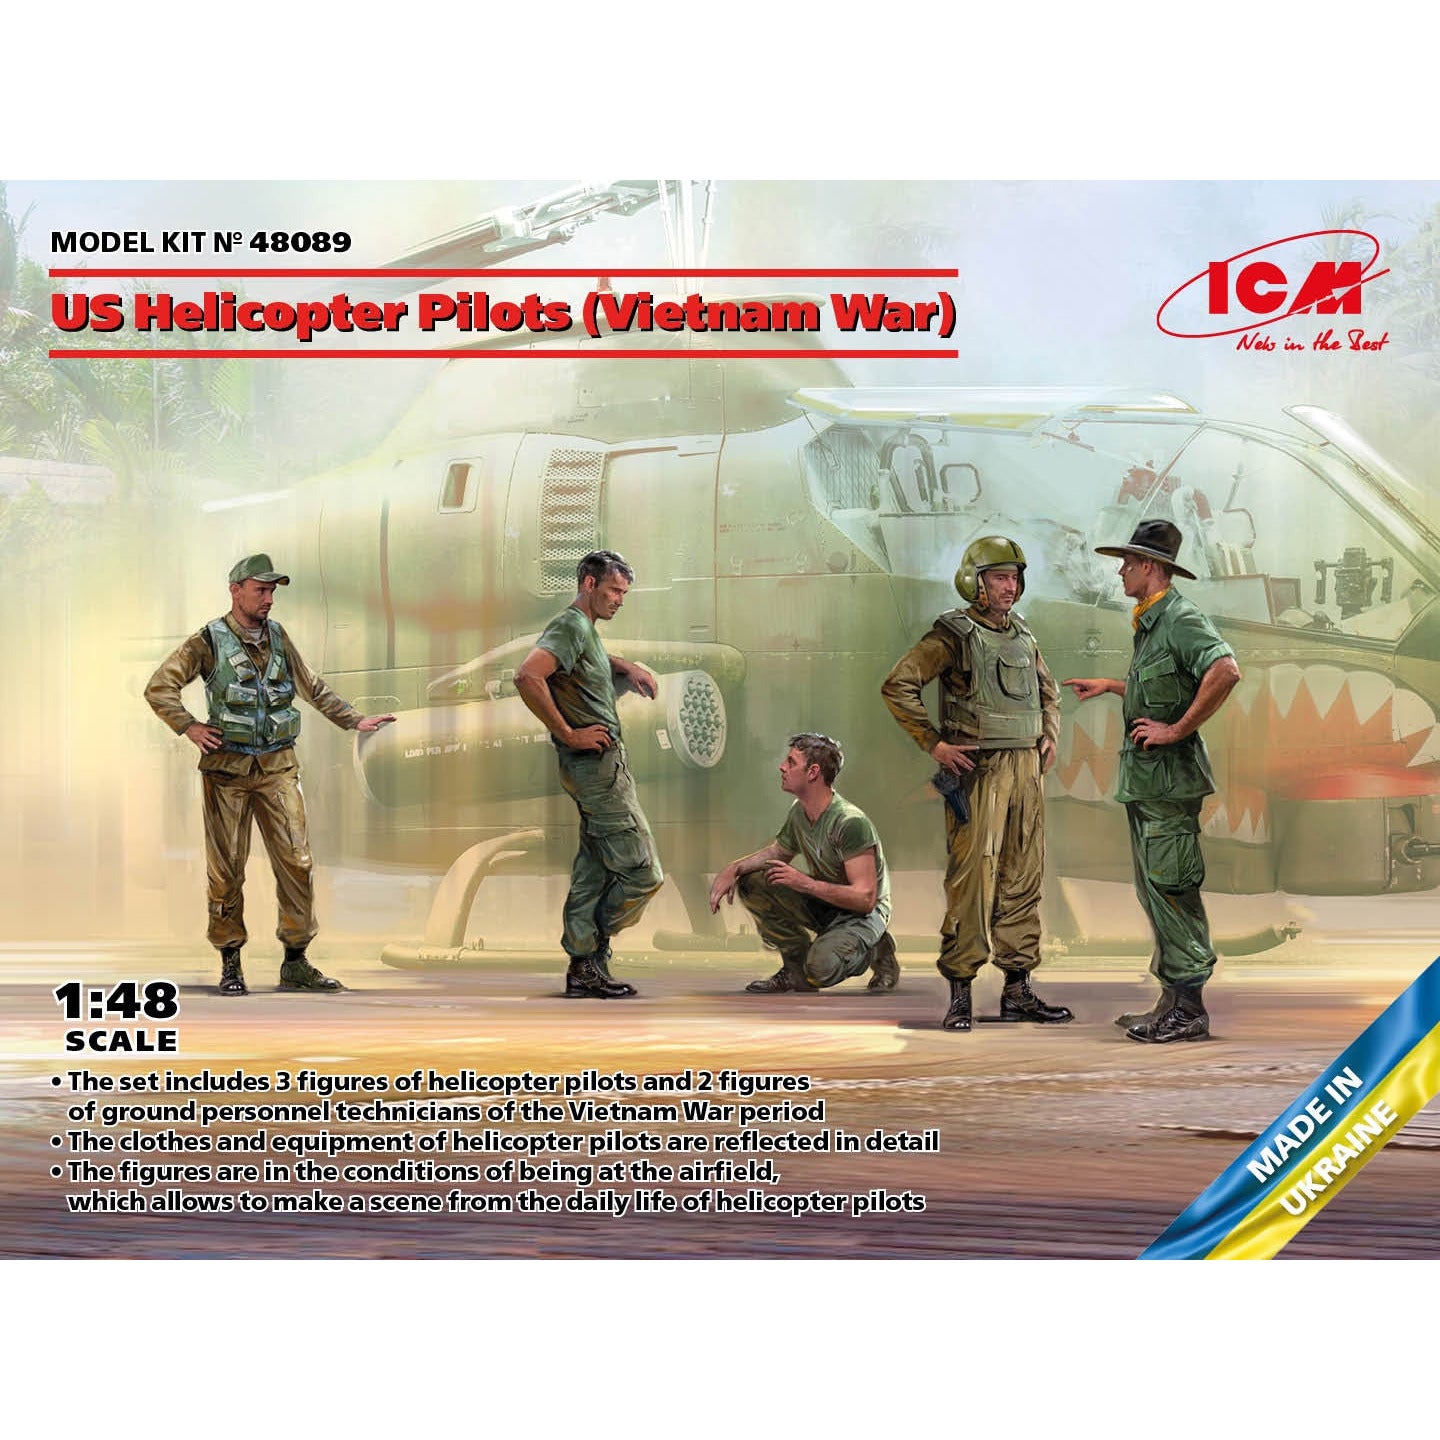 US Helicopter Pilots (Vietnam War) 1/48 #48089 by ICM